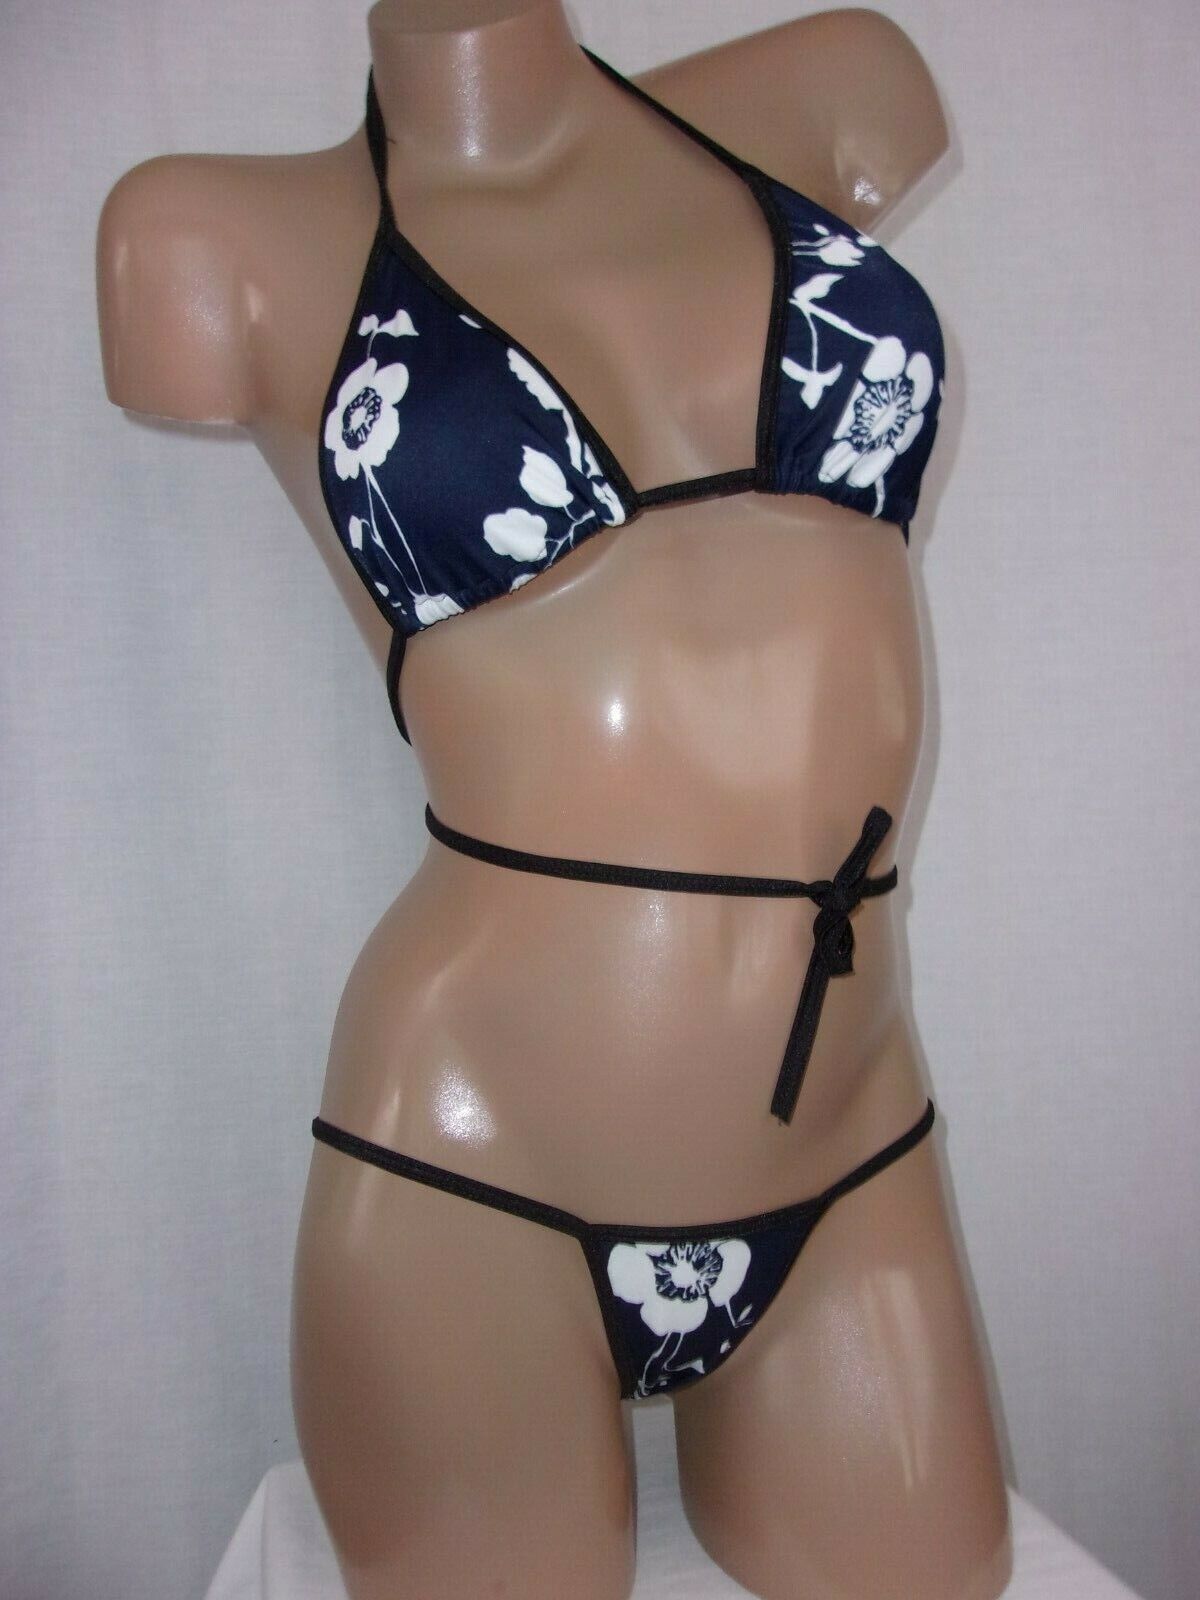 New Sexy Exotic Pole Dancer Costume Thong Bikini 2 Piece Set A/b Cup Floral